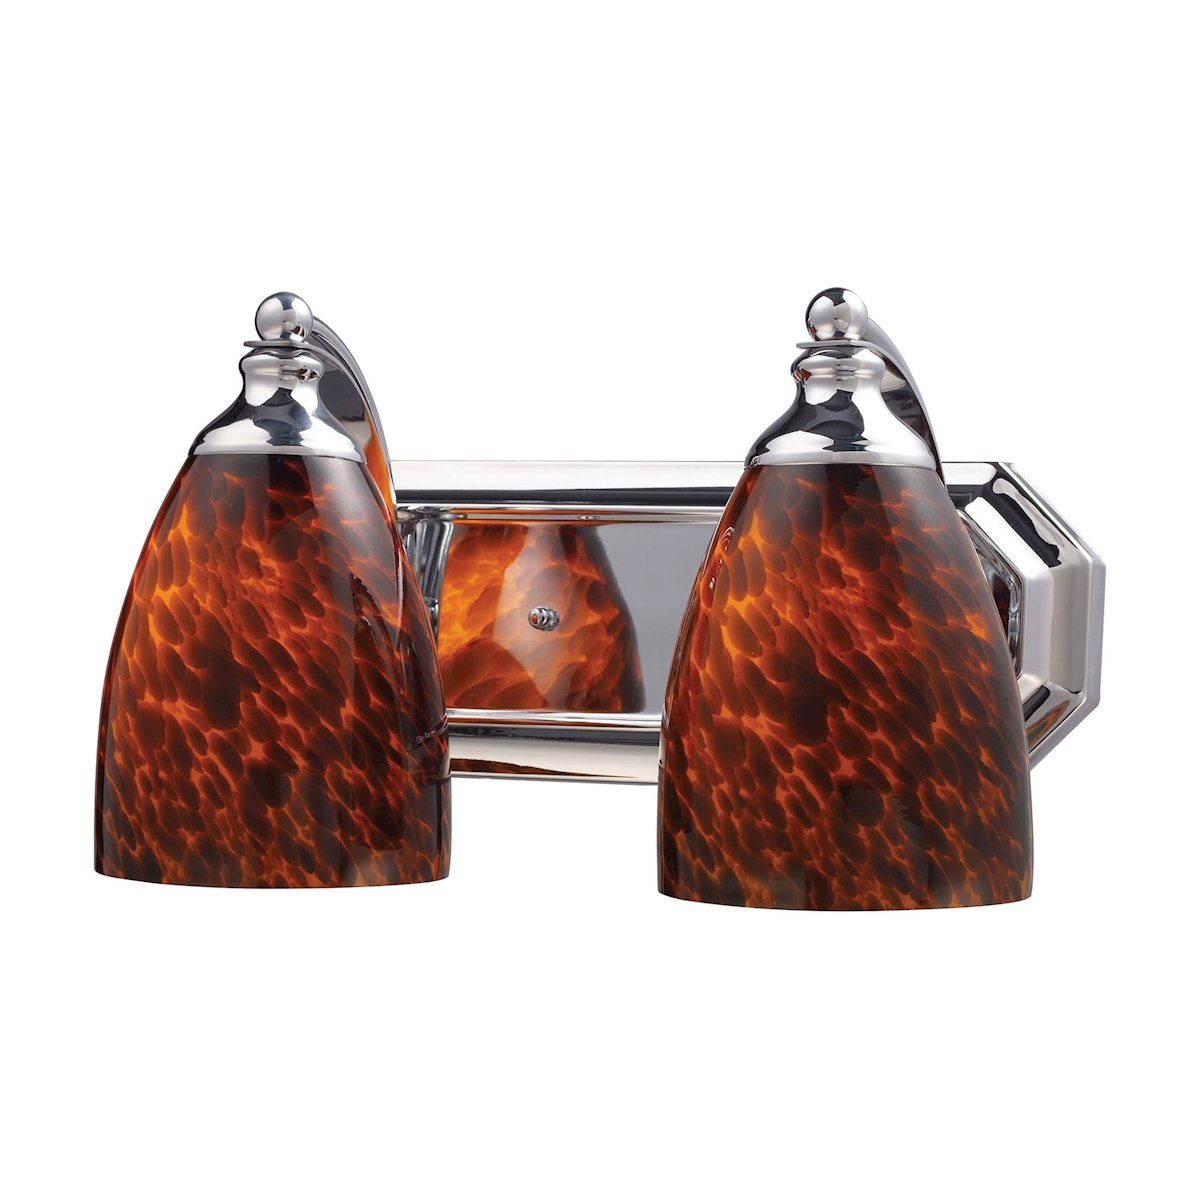 Bath And Spa 2 Light Vanity In Polished Chrome And Espresso Glass Wall Elk Lighting 